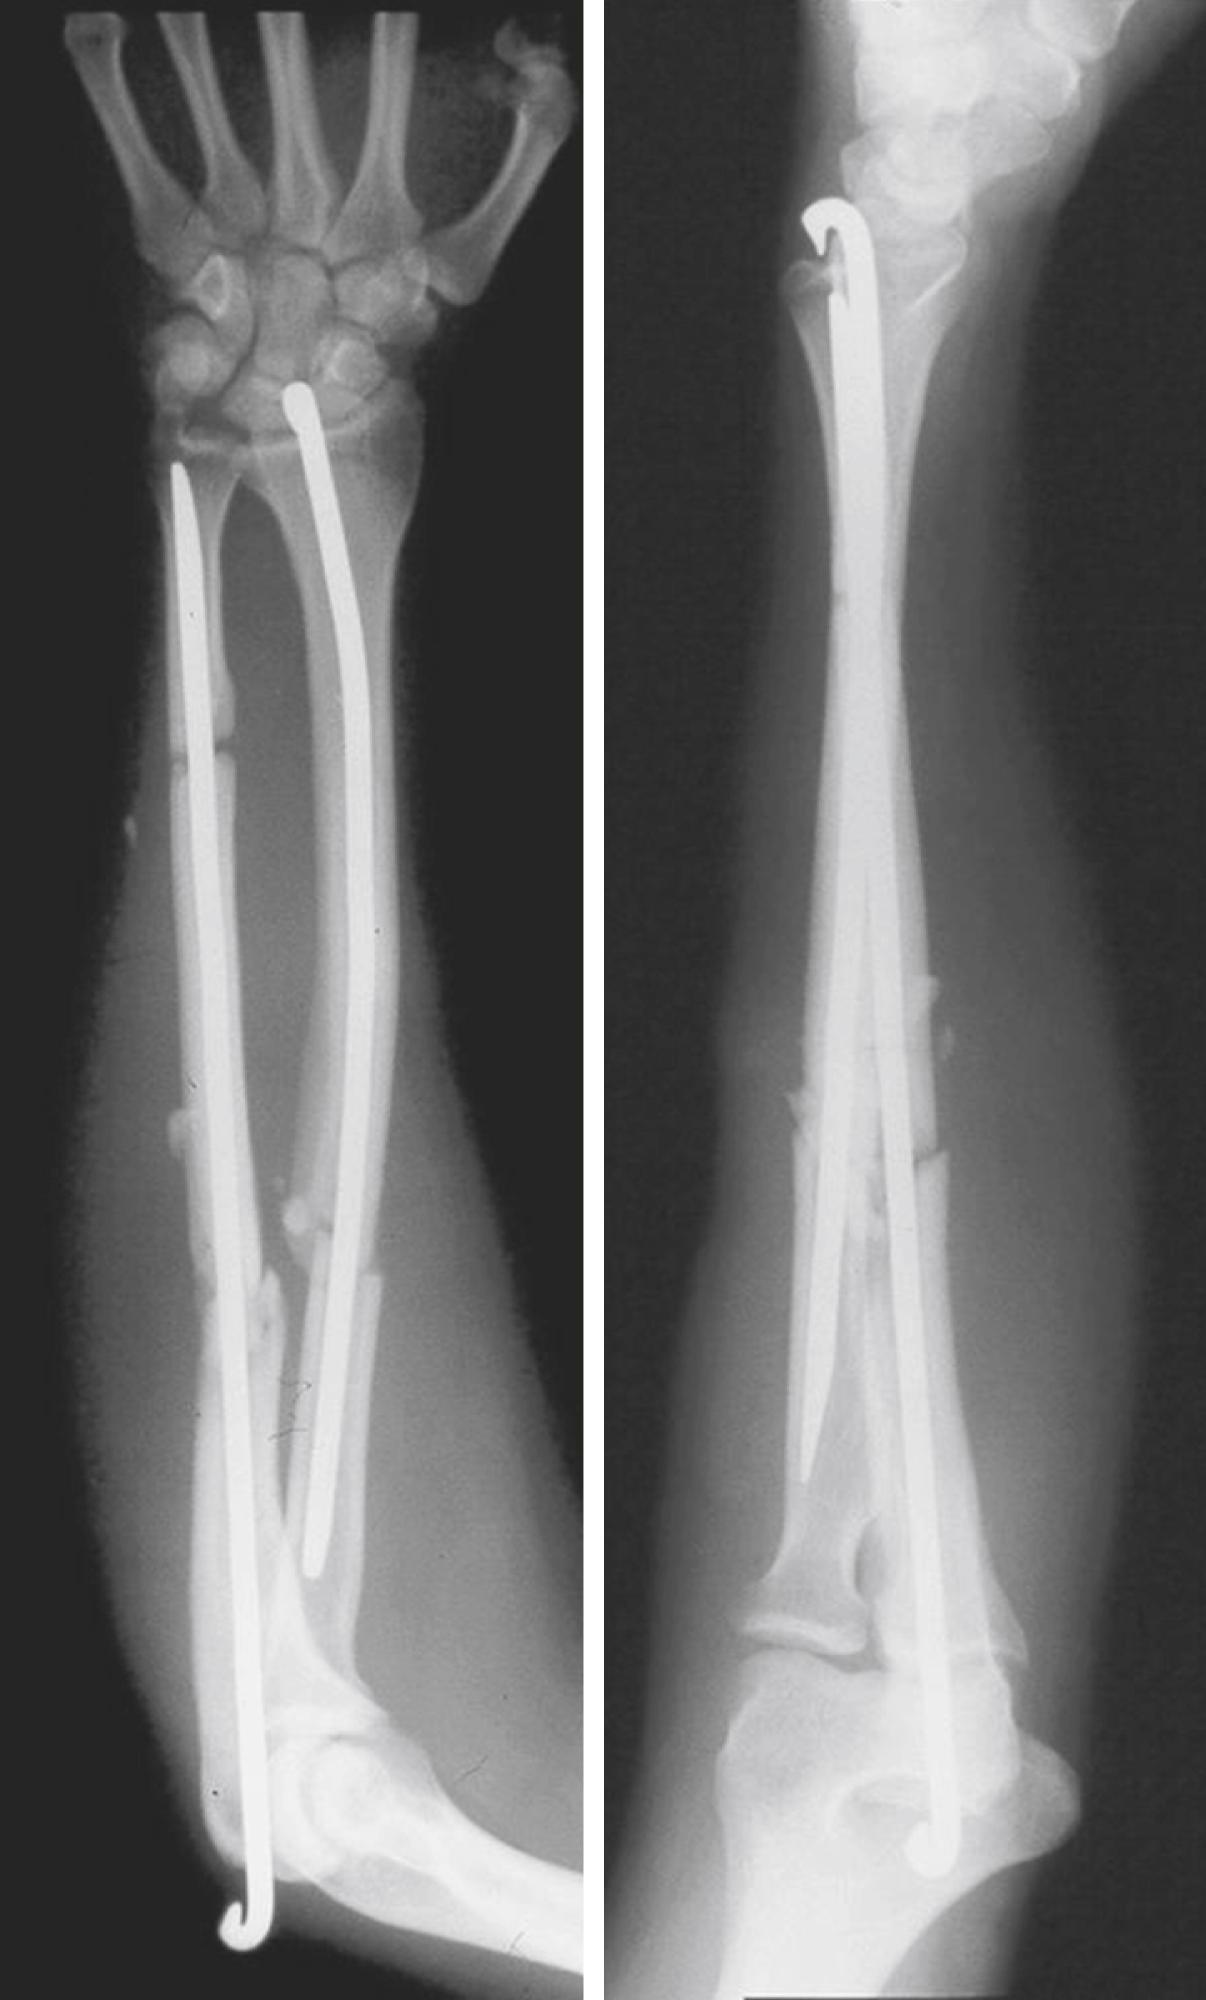 Fig. 21.17, Intramedullary fixation of radial shaft and segmental ulnar shaft fractures associated with significant blunt soft tissue injury.